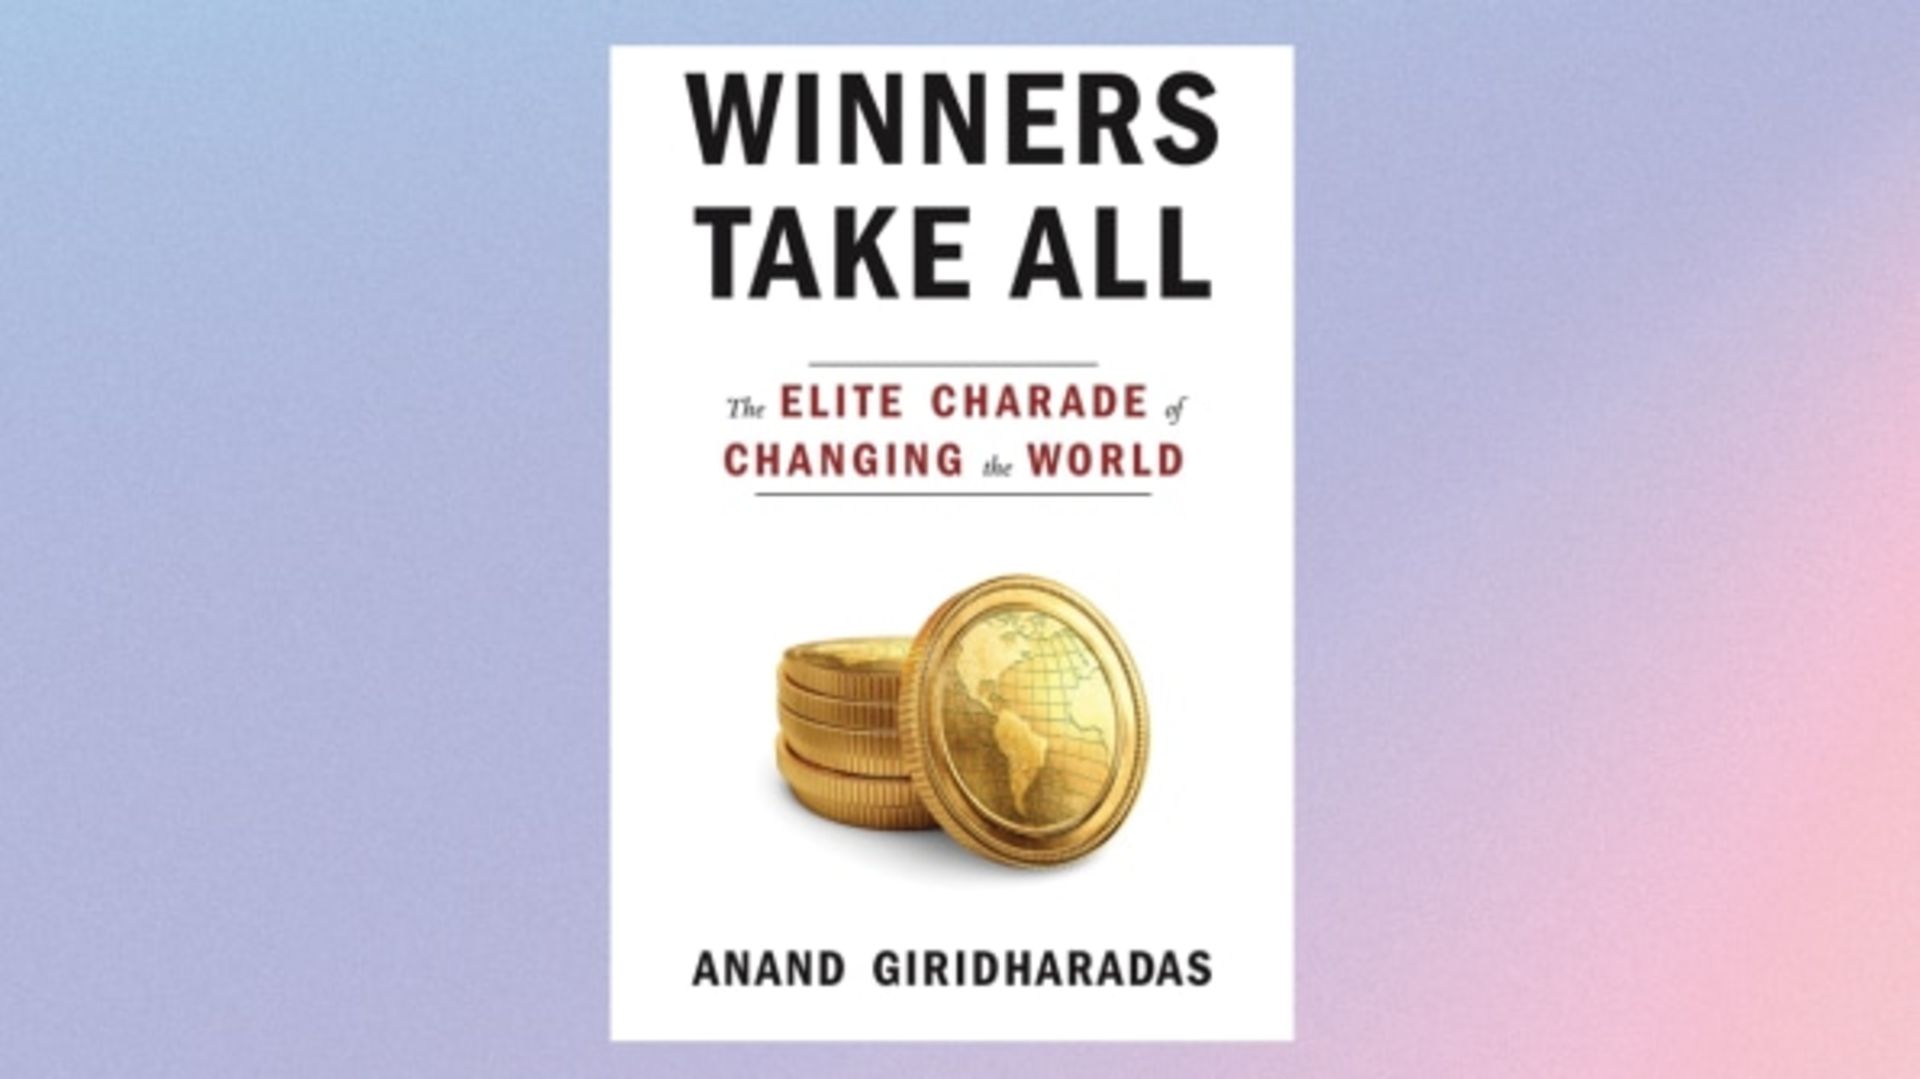 WINNERS TAKE ALL: THE ELITE CHARADE OF CHANGING THE WORLD BY ANAND GIRIDHARADAS